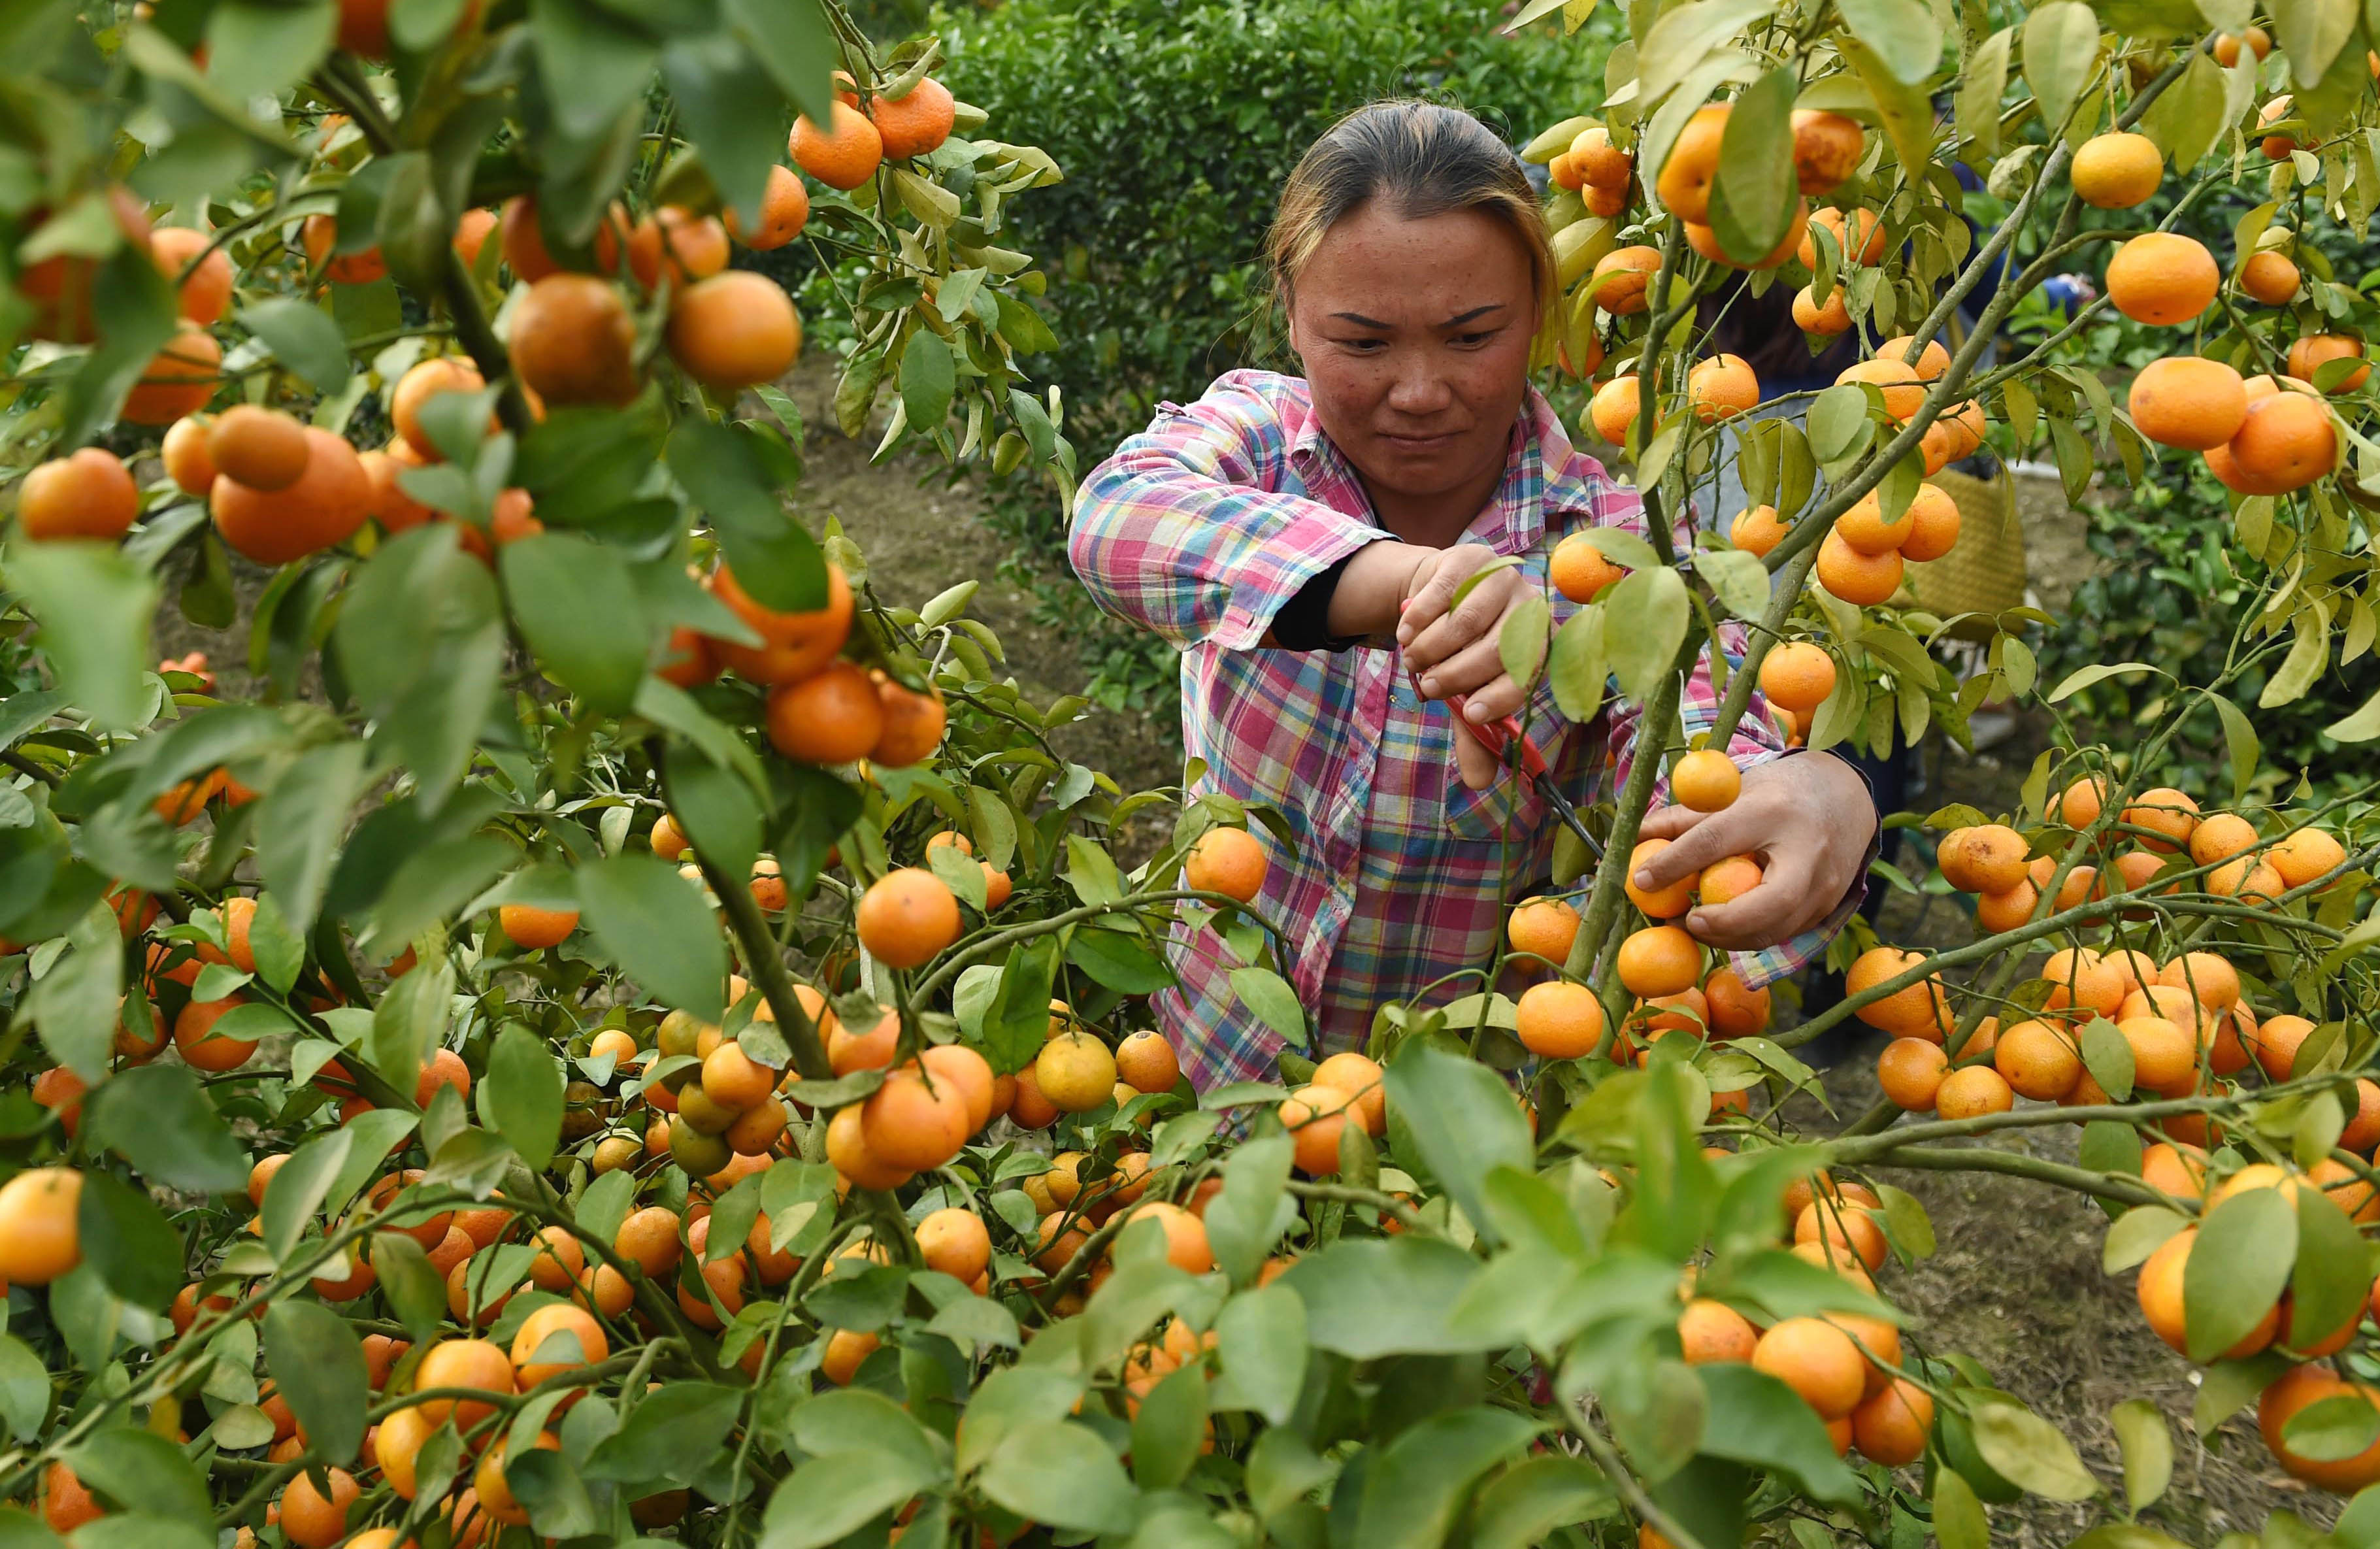 Beijing must overhaul farm management in China and unleash the creativity of its farms and farmers. Photo: Xinhua